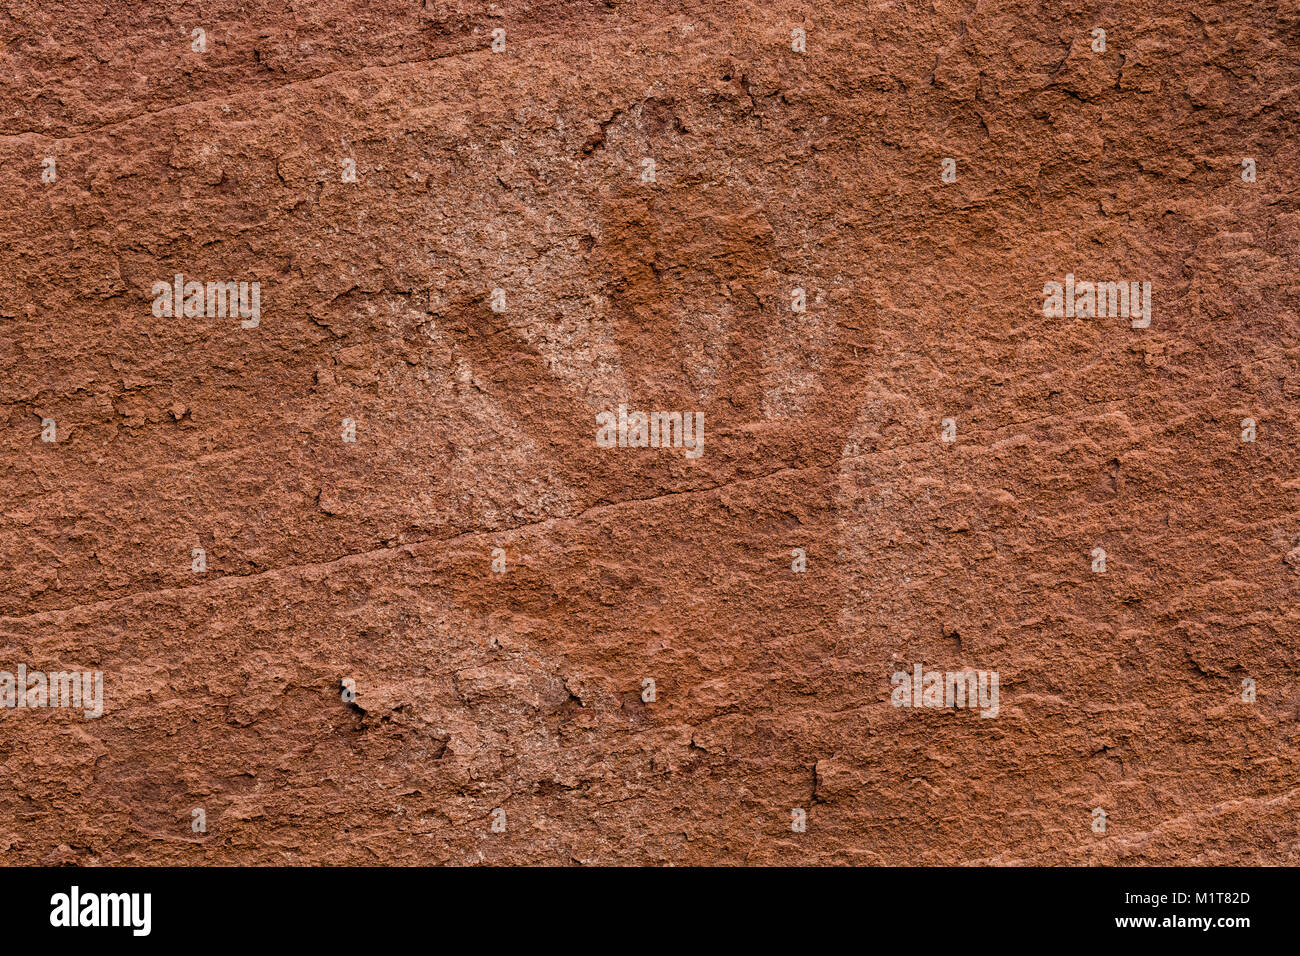 Hand Print at Big Ruin, an Ancestral Pueblo village site within Salt Creek Canyon in The Needles District of Canyonlands National Park, Utah, USA Stock Photo